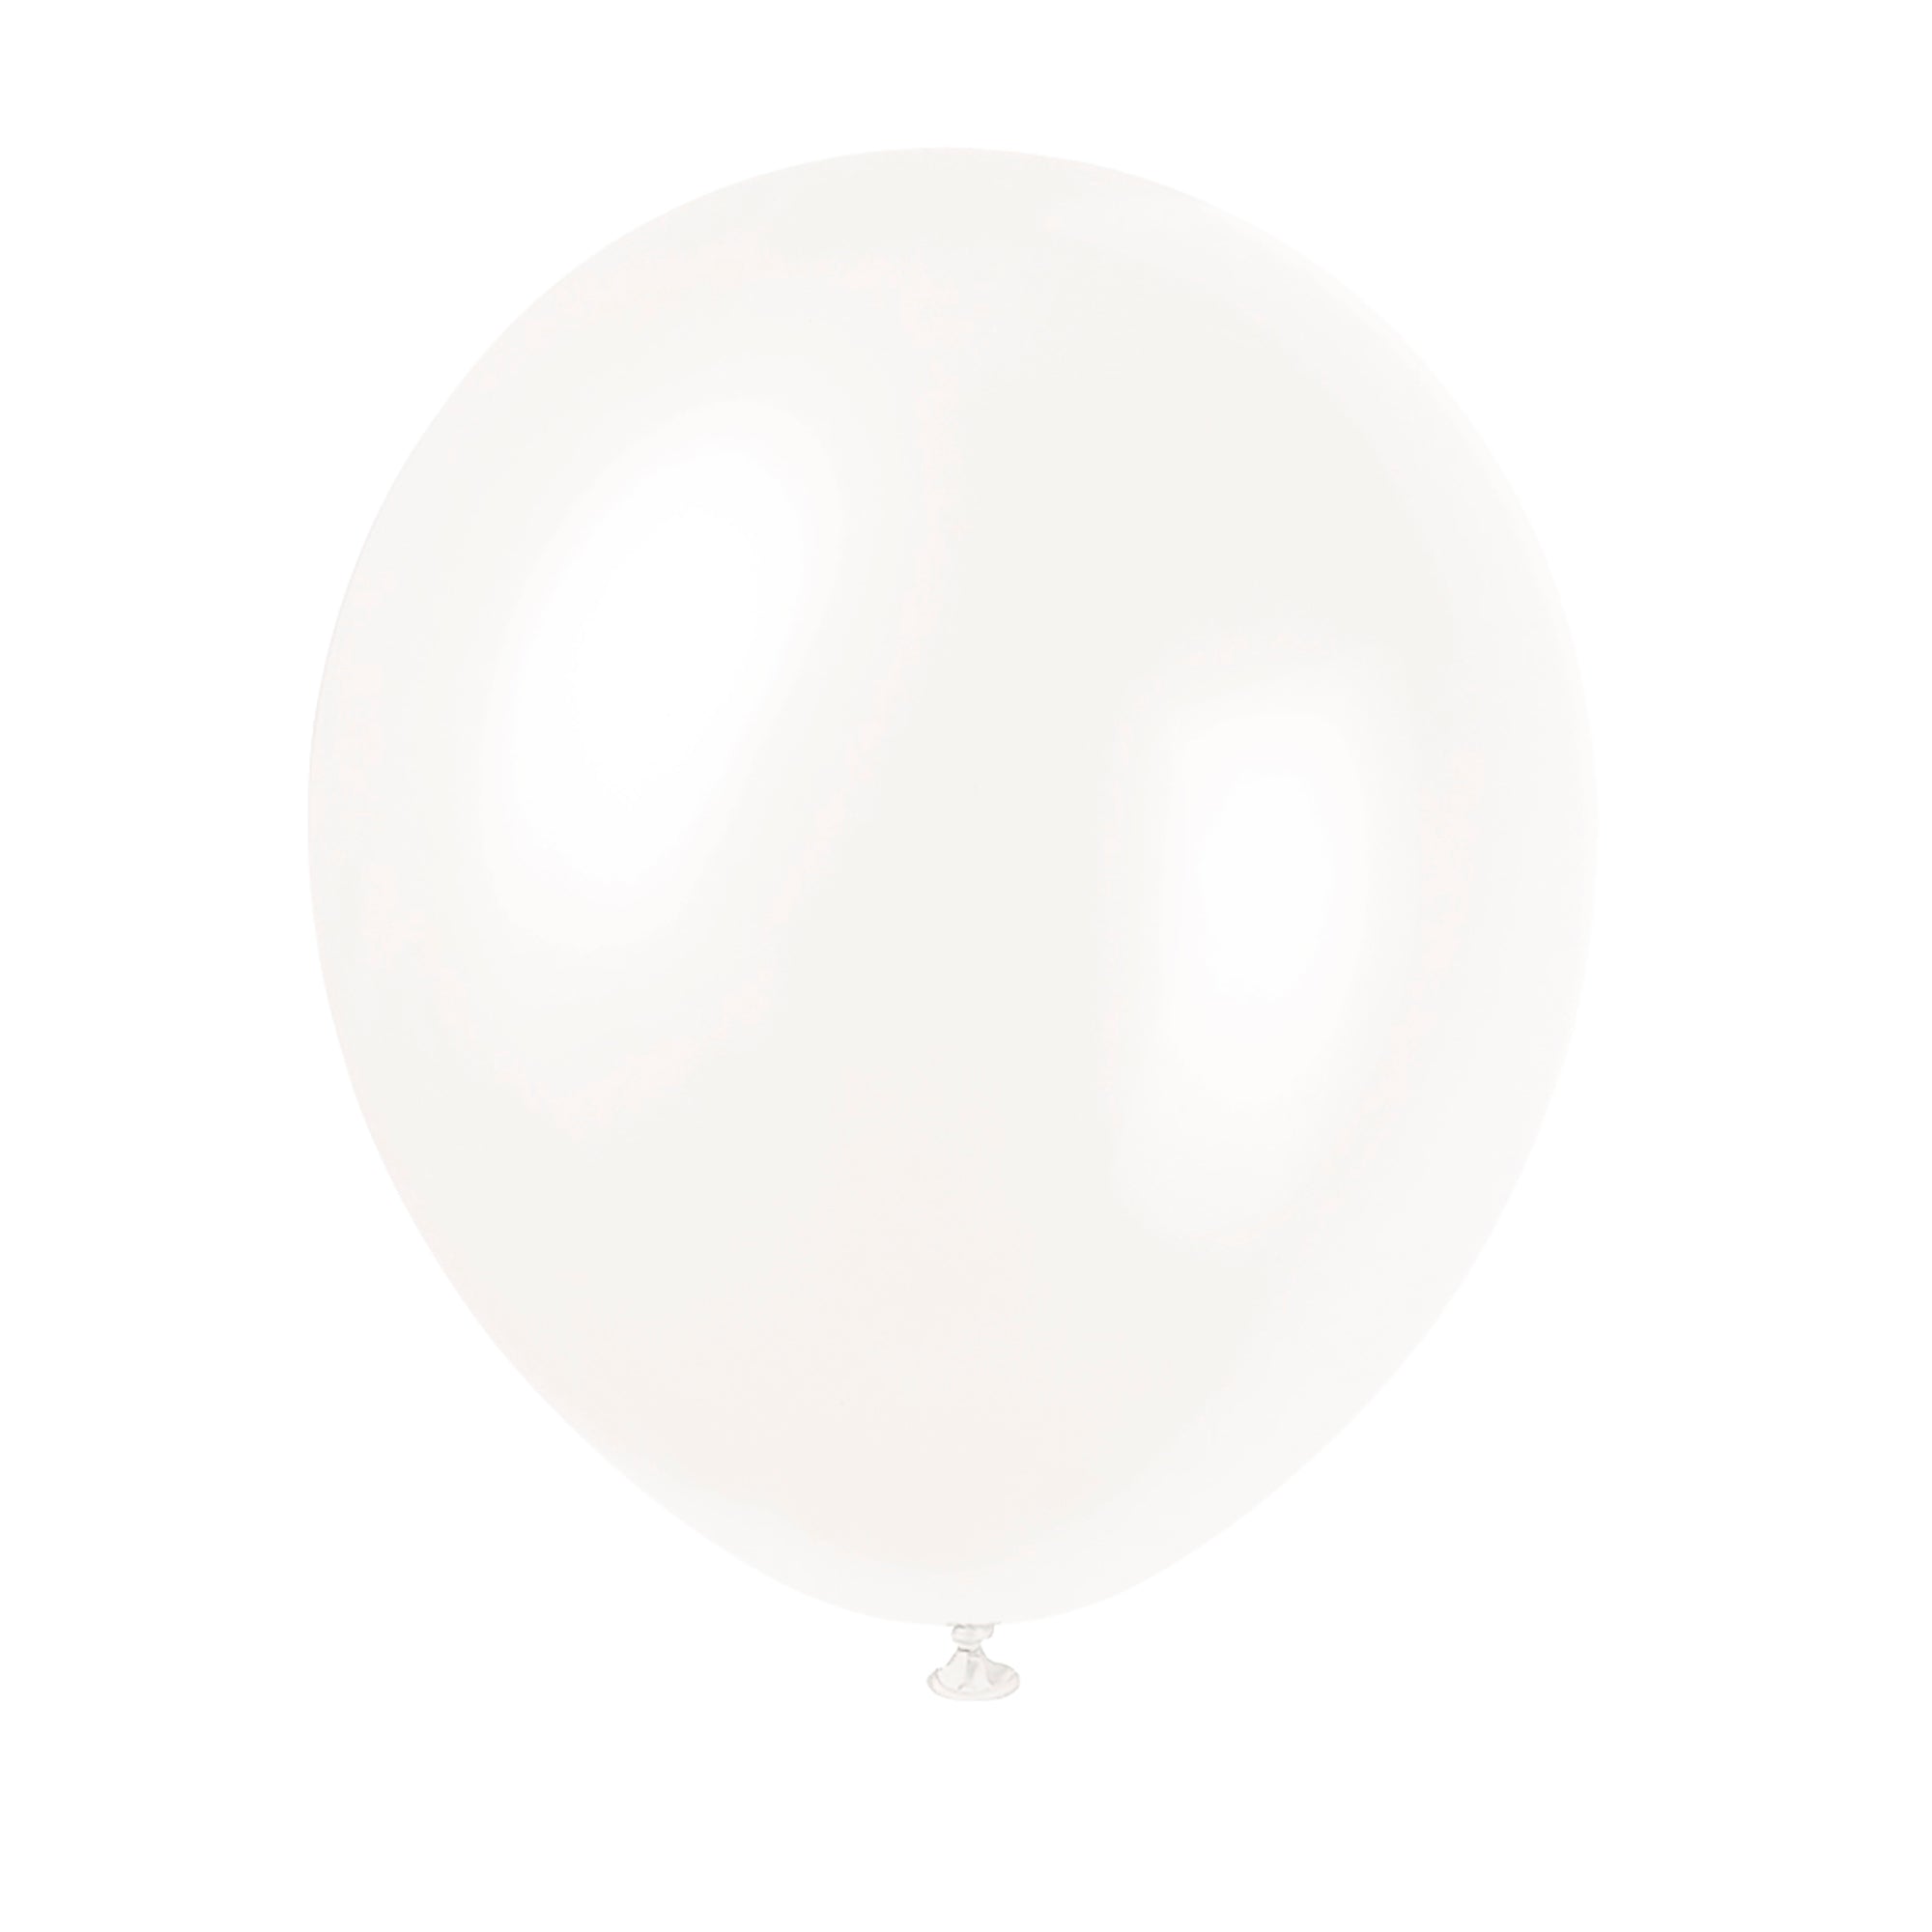 8 Latex Pearlized Balloons 12in Winter White